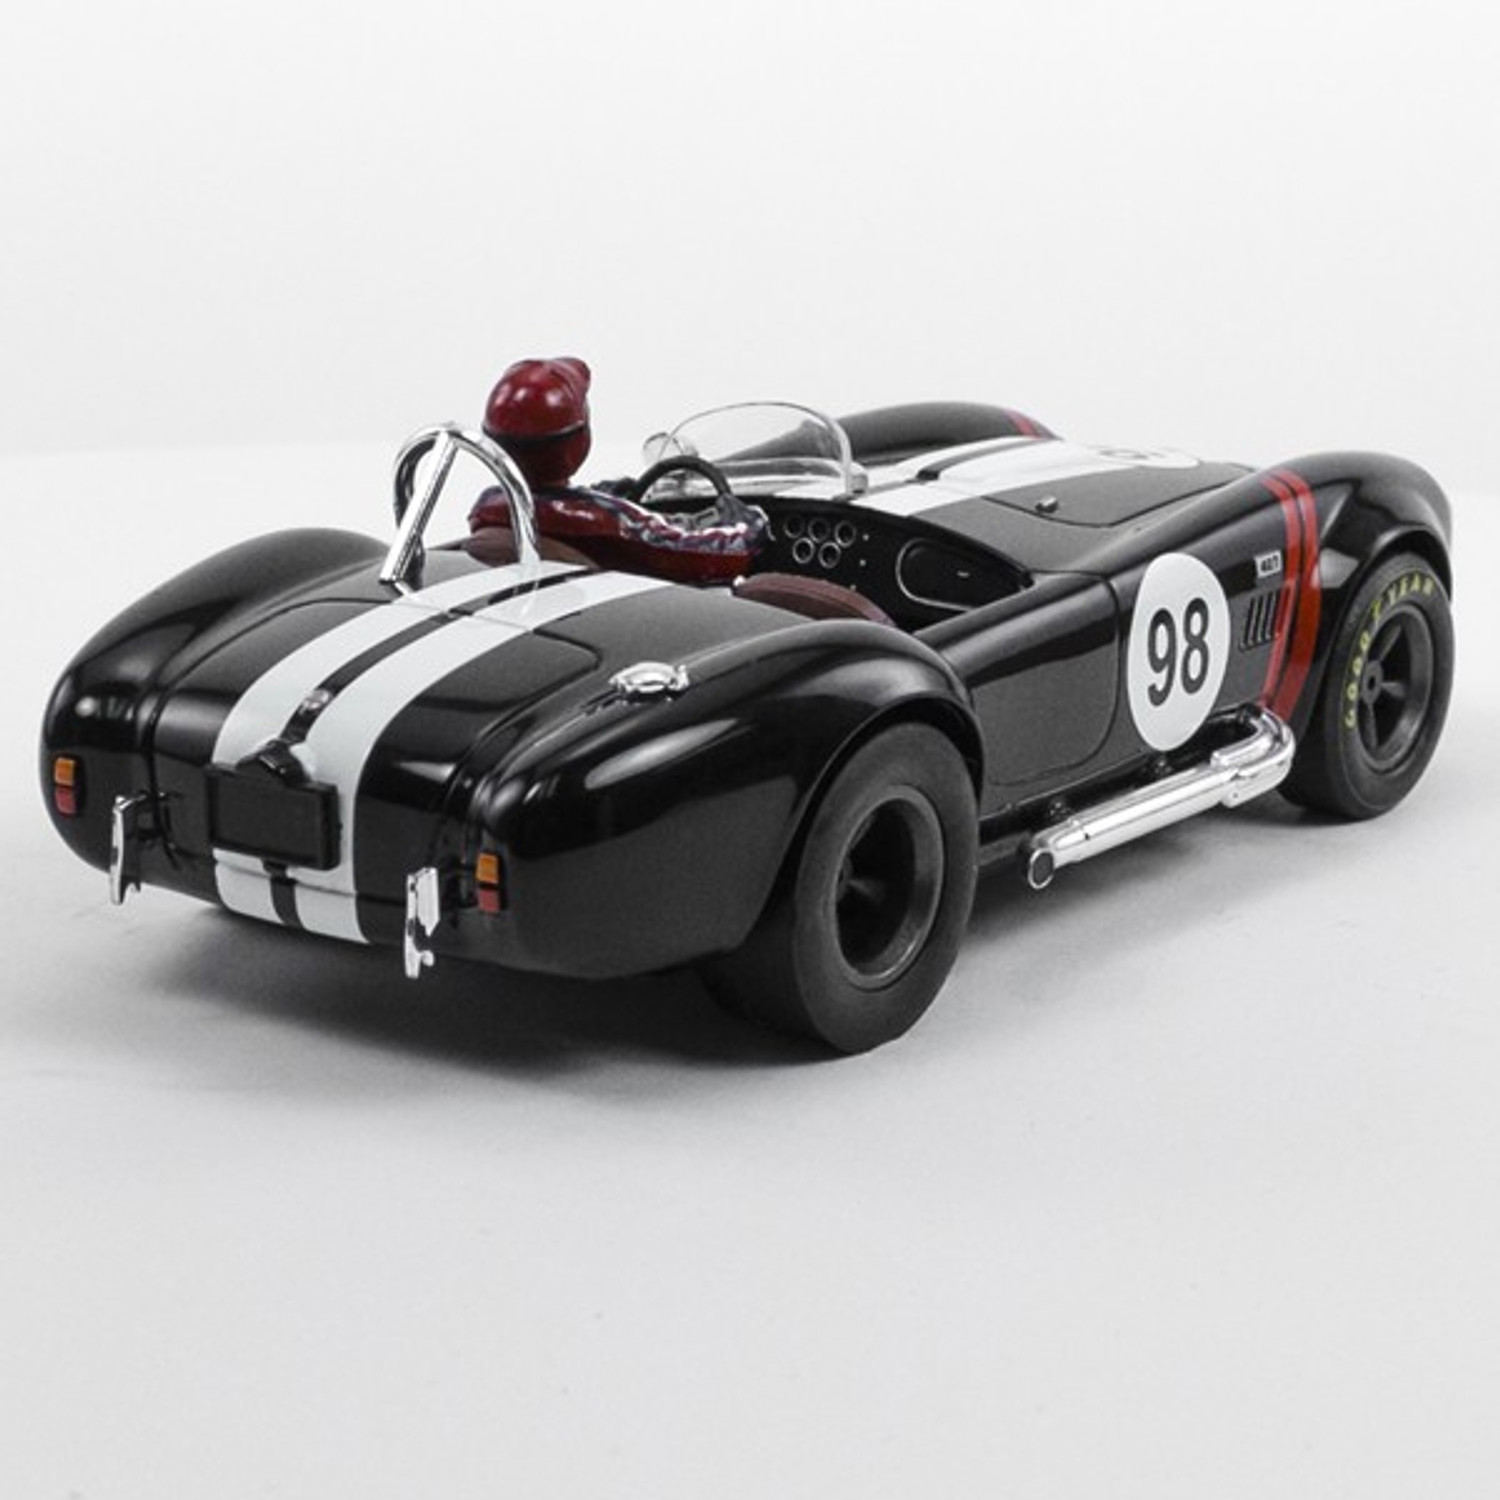 Stock Number: 16221 - Black White Stripe Number 98 Car by Unknown